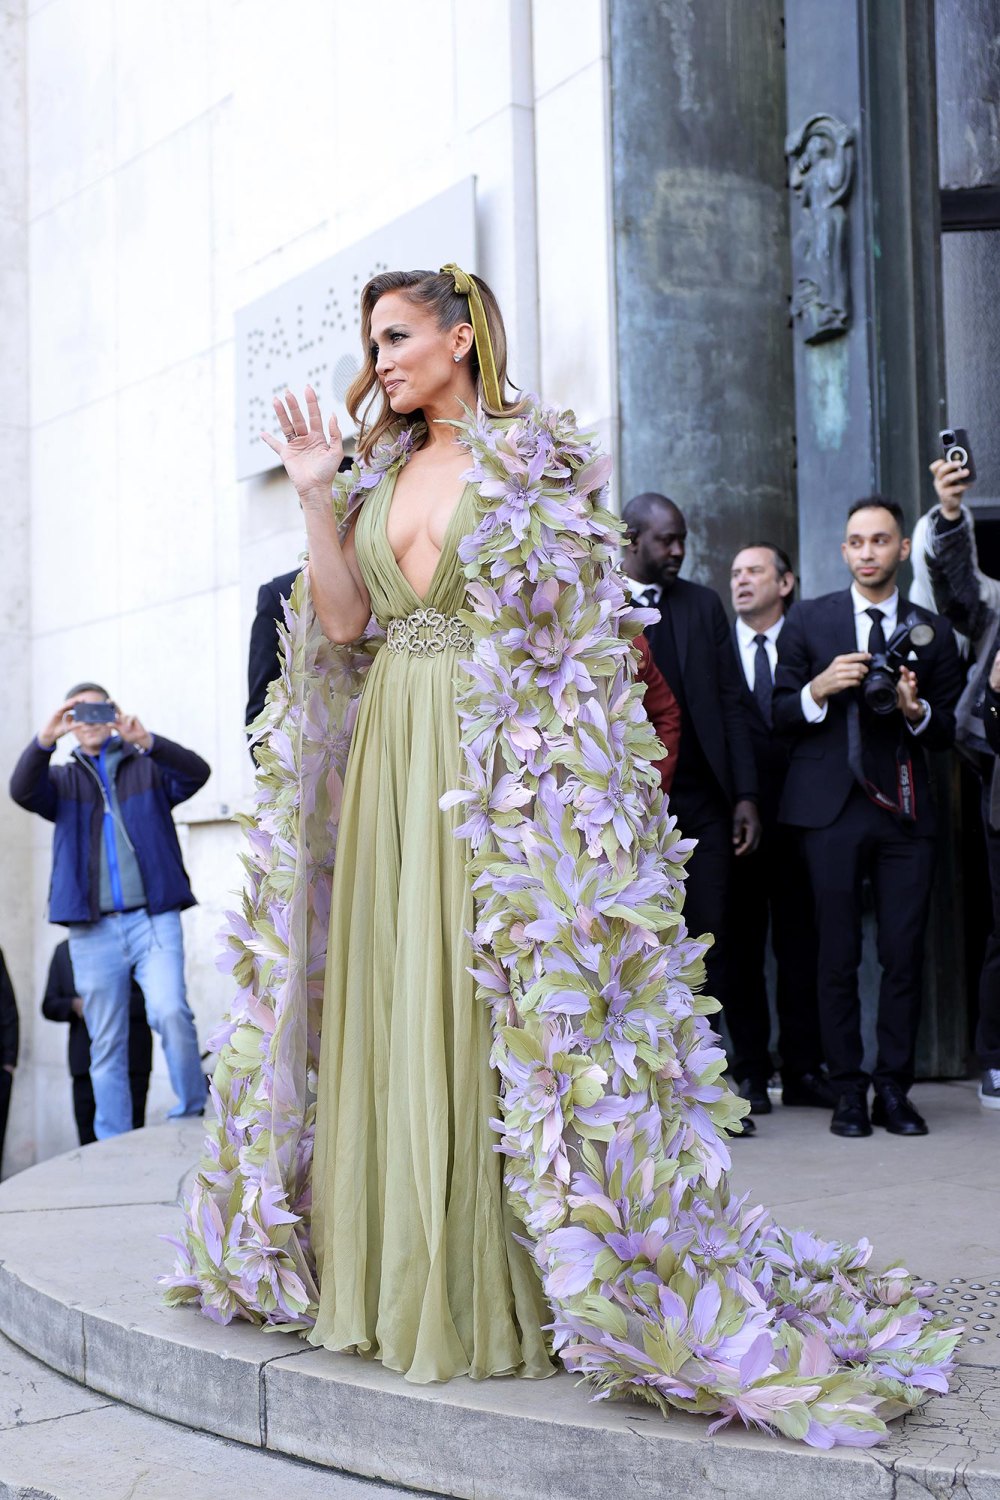 Jennifer Lopez Drapes Herself in a Cascading Floral Cape at Elie Saab Show During Paris Fashion Week